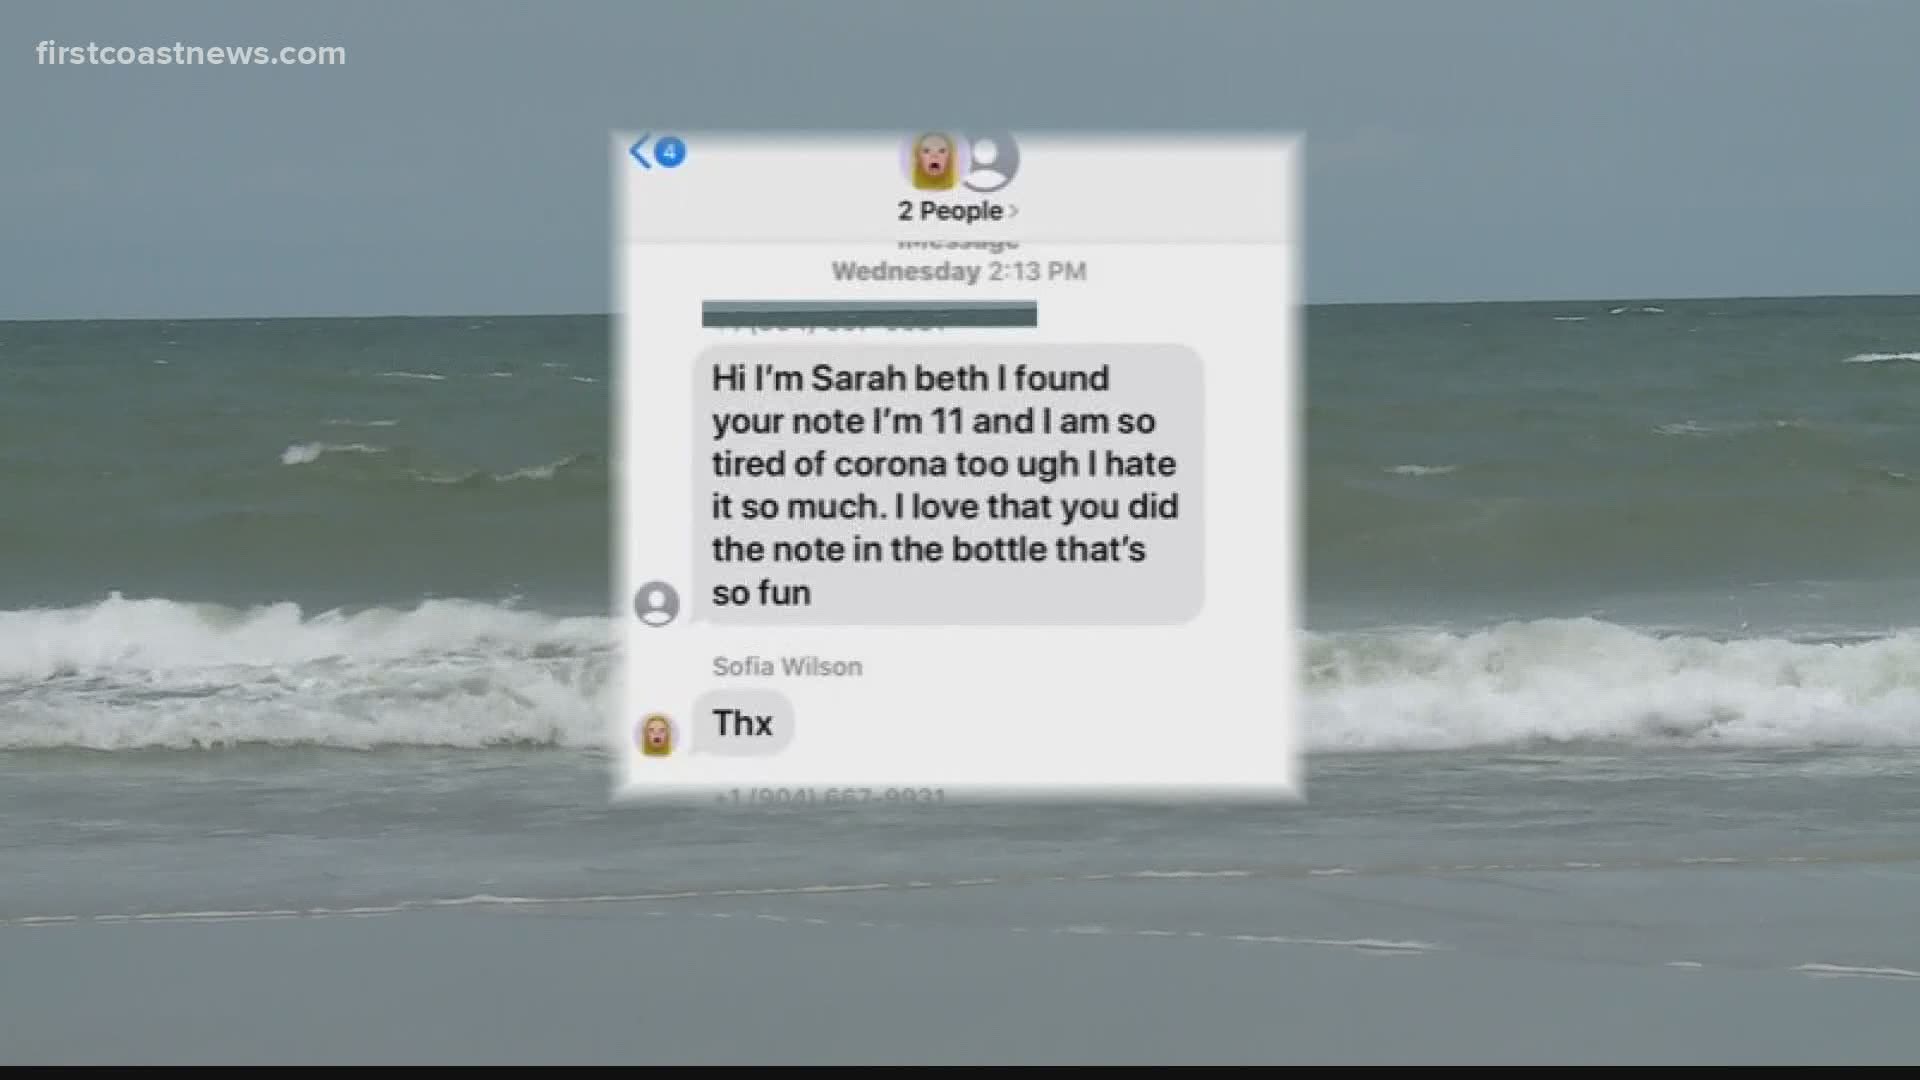 Sofia Wilson from New York sent a message in a bottle while on vacation in Florida. Sarah Beth Walters from Julington Creek found the bottle while in North Carolina.